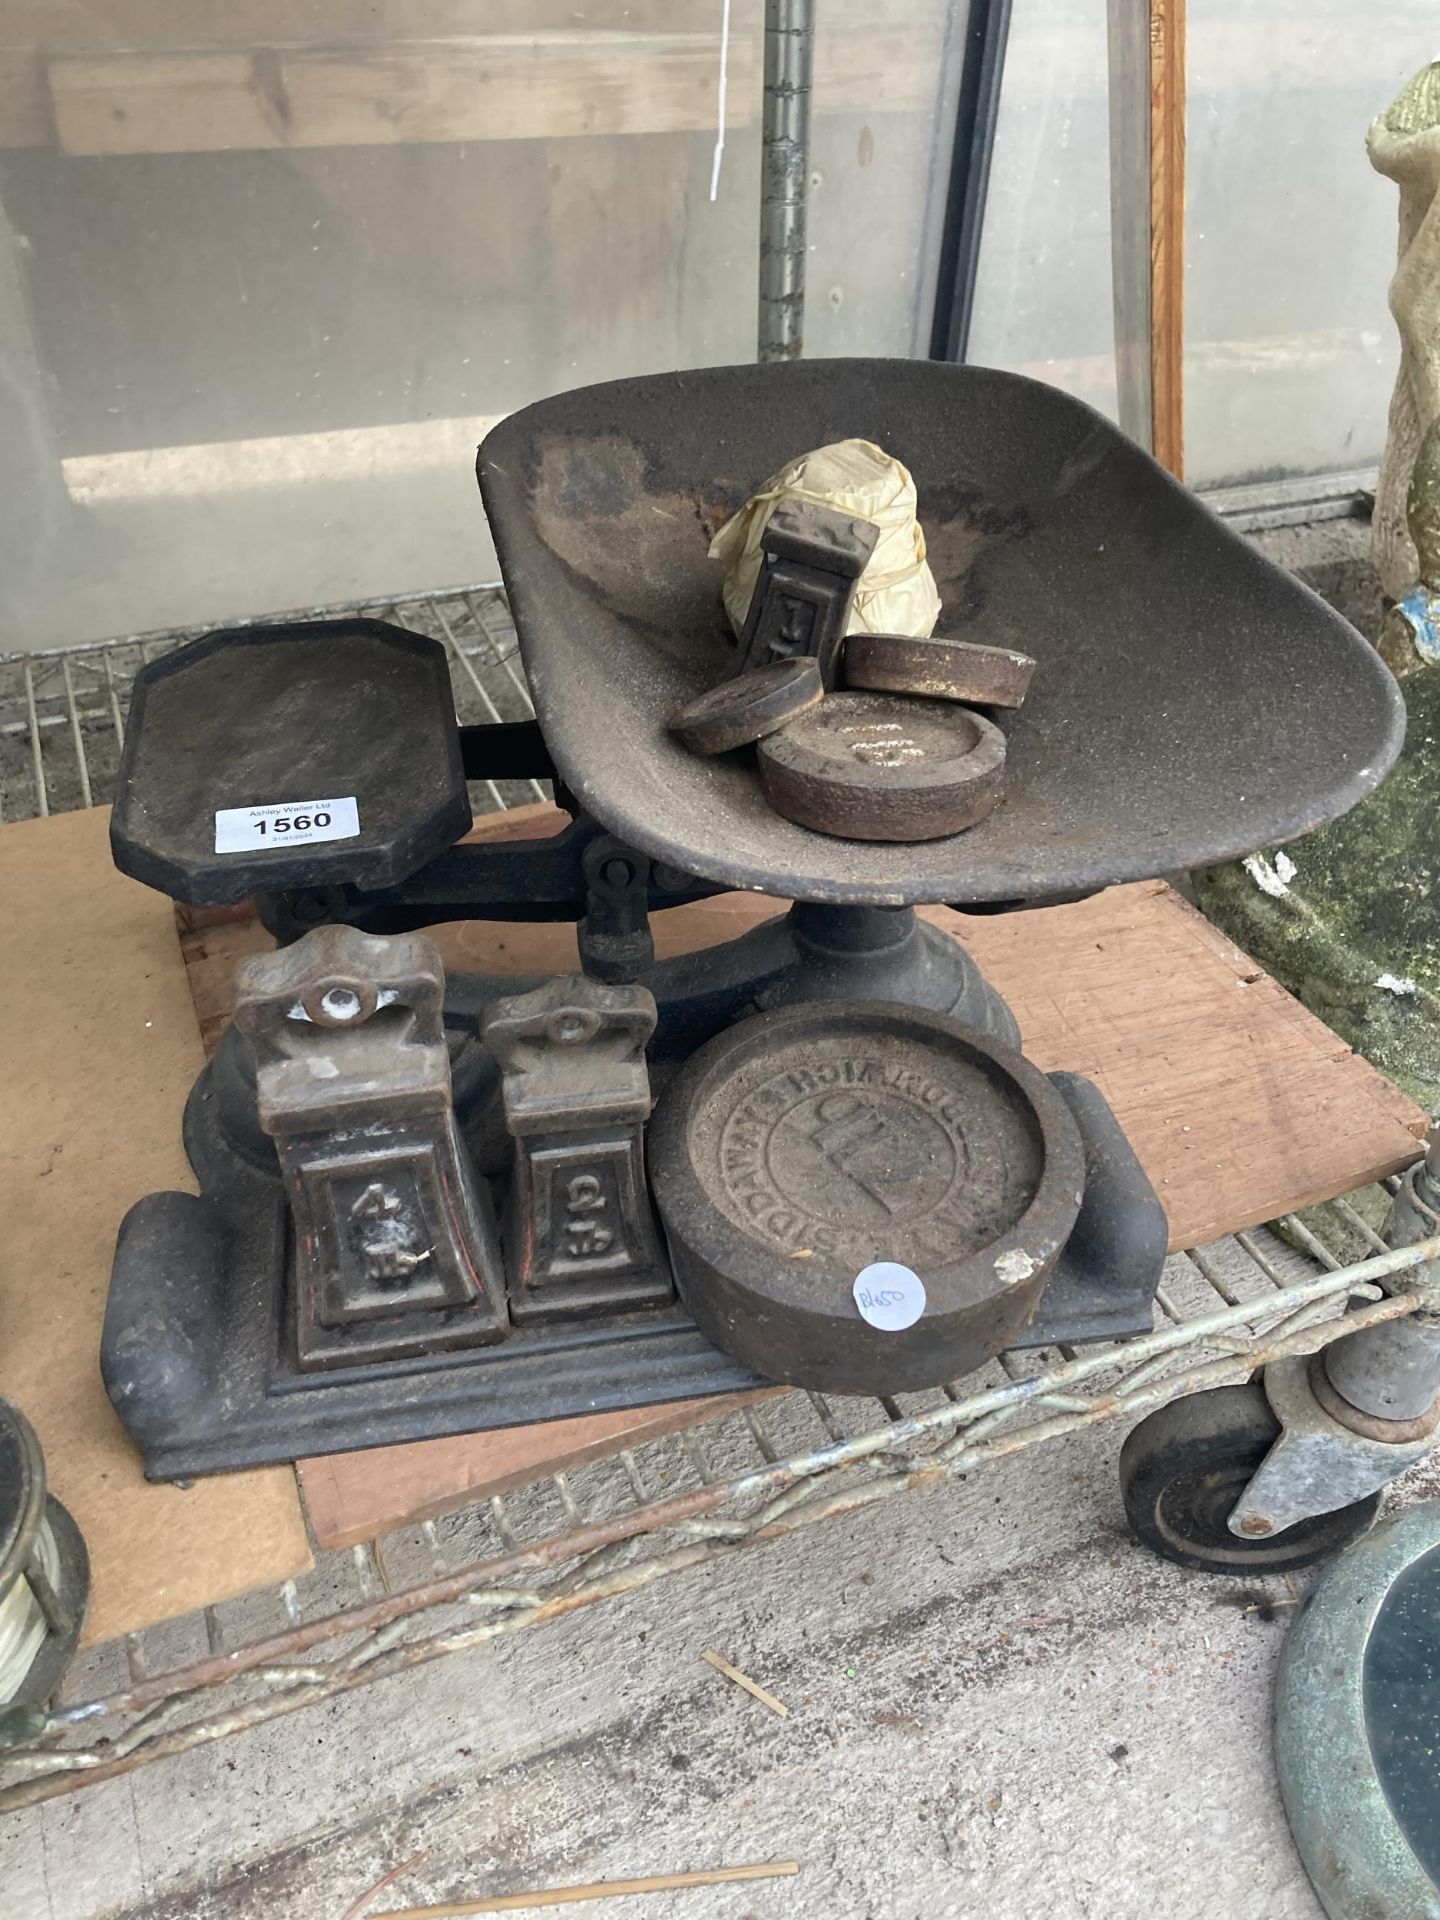 A PAIR OF VINTAGE BALANCE SCALES WITH AN ASSORTMENT OF WEIGHTS